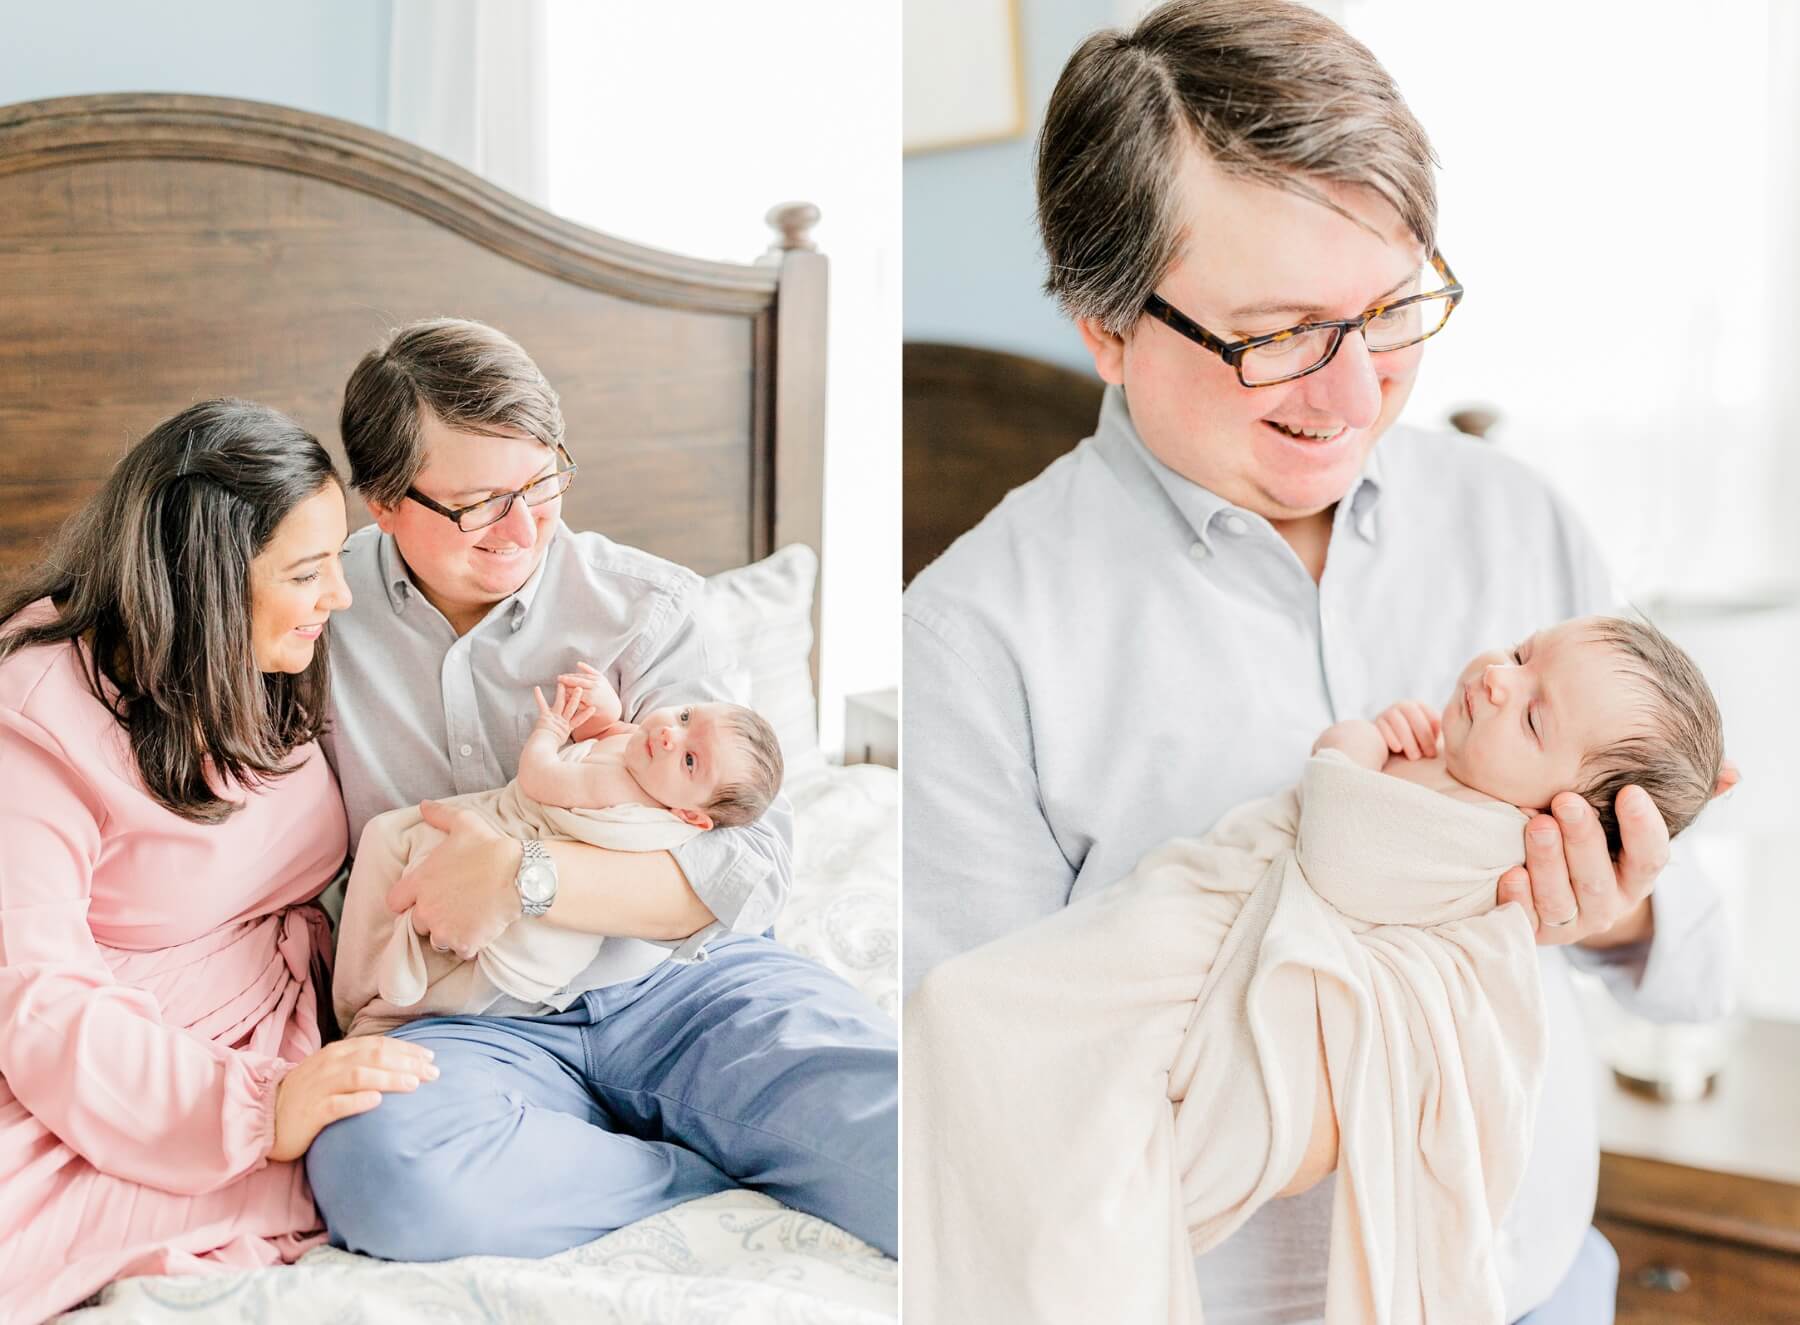 A happy father cradles his newborn baby while sitting on a bed with mom